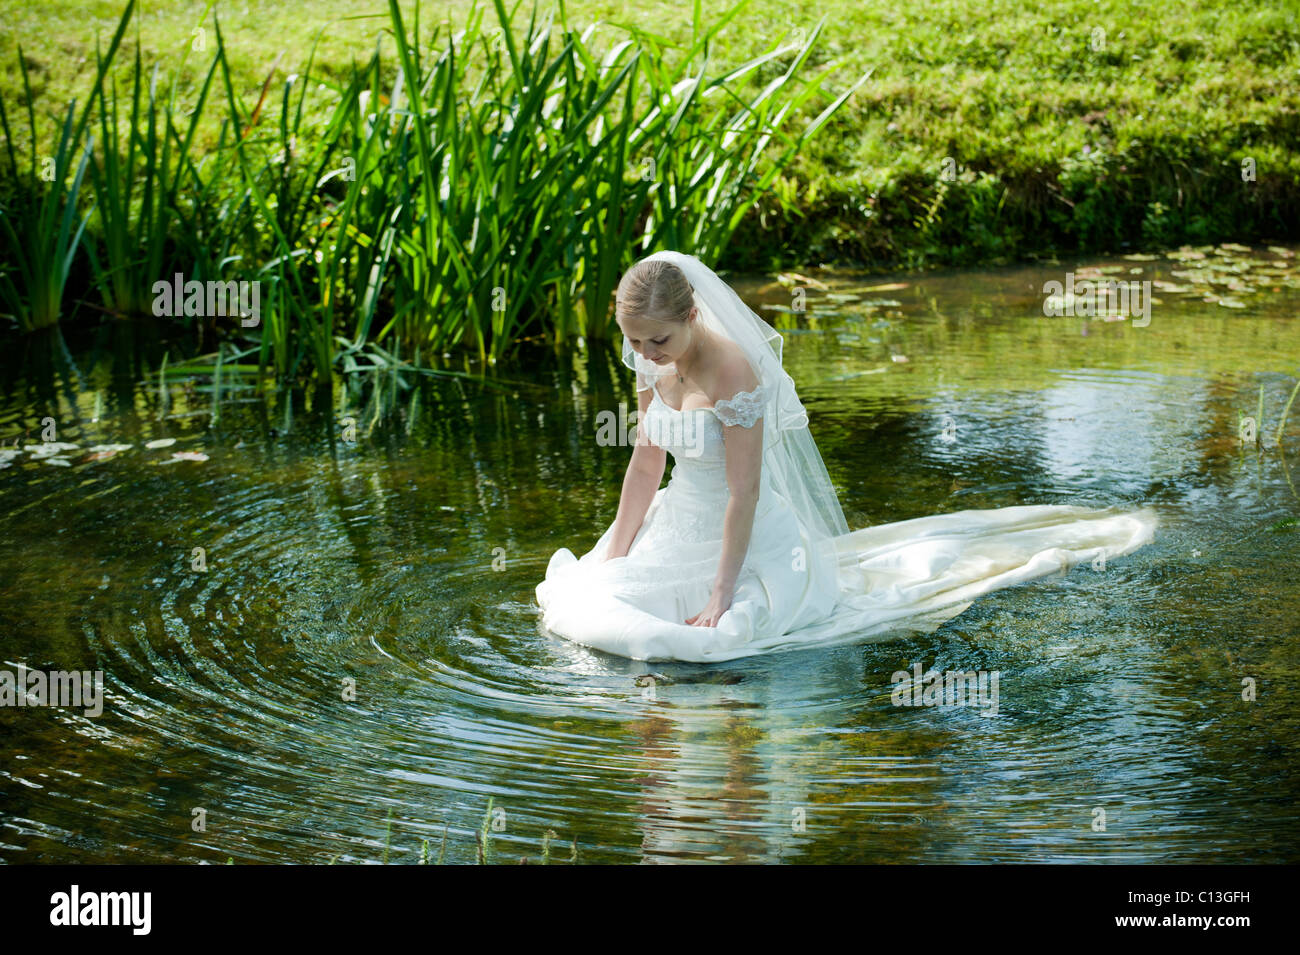 woman lady walking into lake water up to her waist in long wedding dress with lily pads and reeds Stock Photo